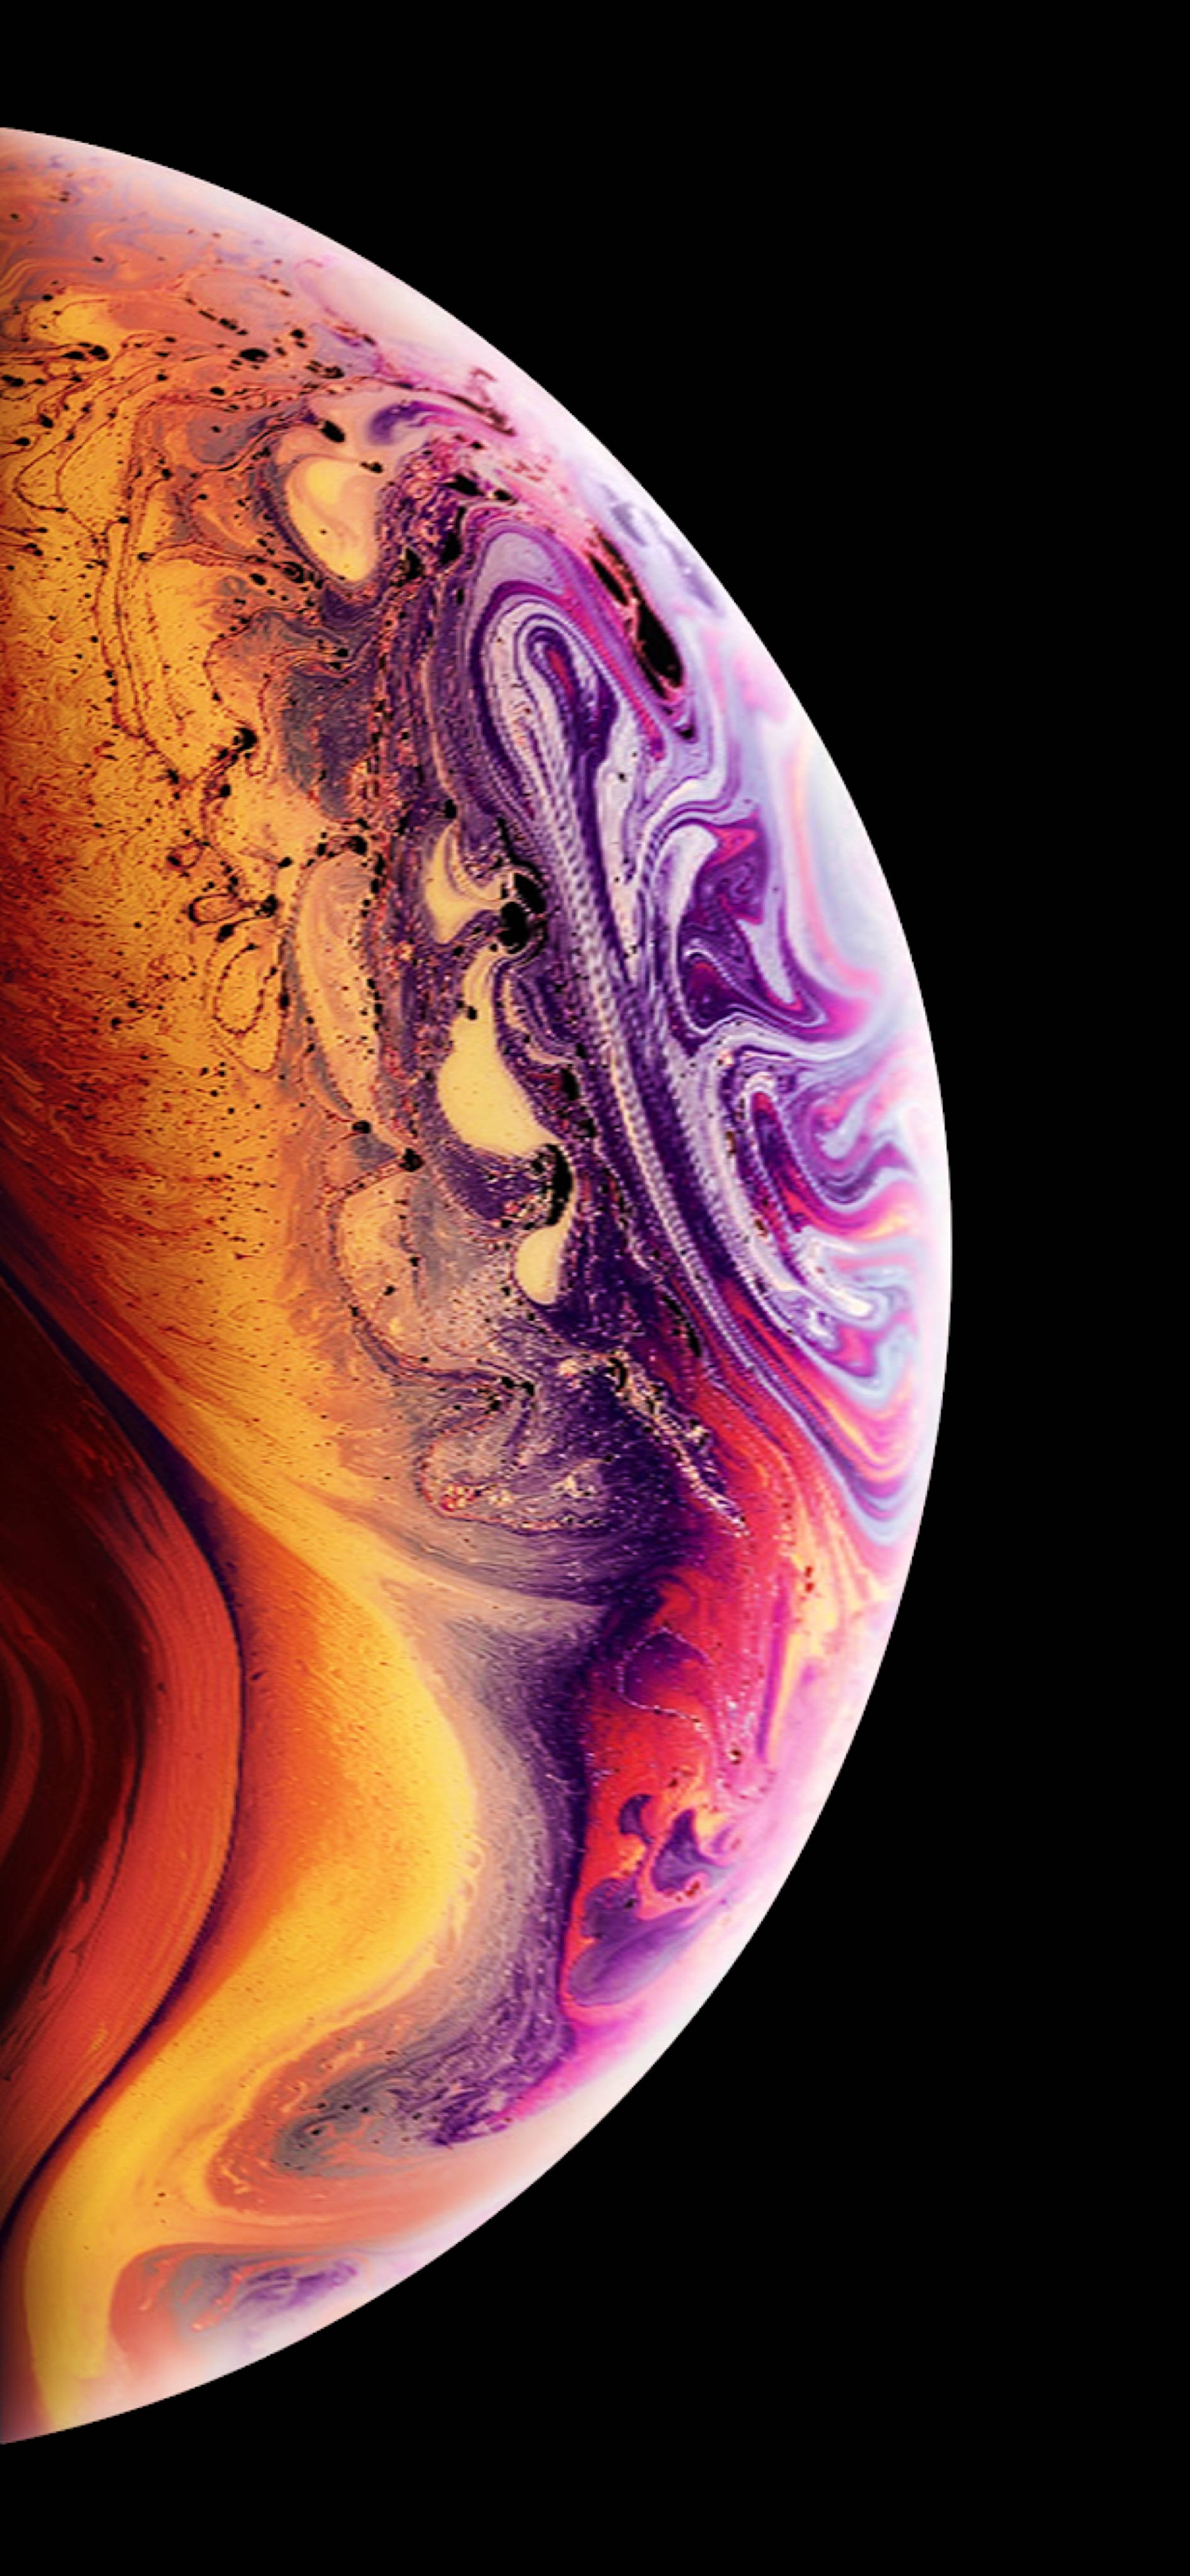 An Image Of An Apple Iphone Xs With A Colorful Swirl Background